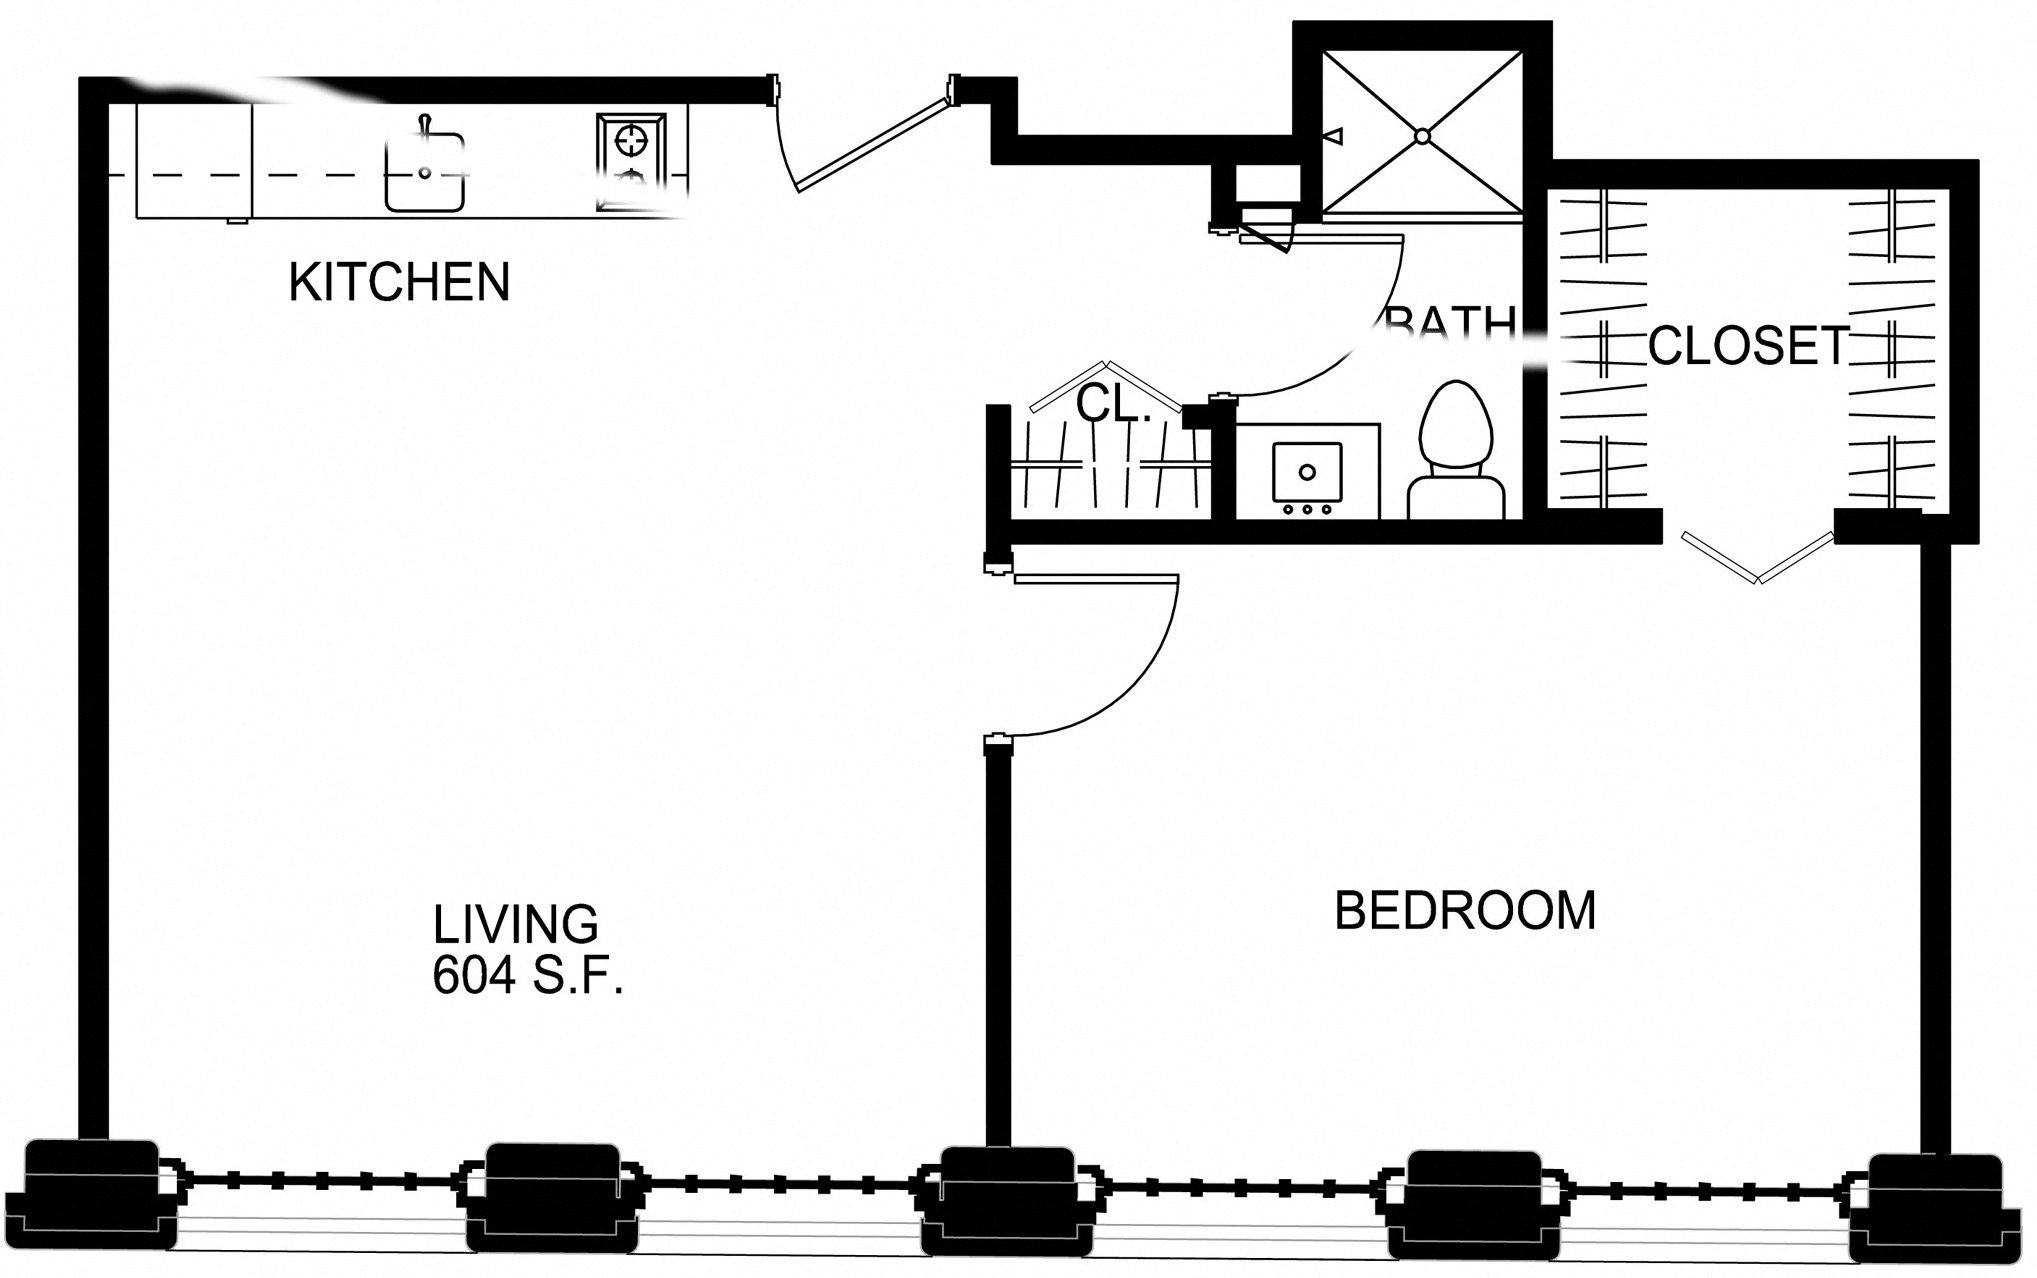 Floorplan for Apartment #S2426, 1 bedroom unit at Halstead Providence